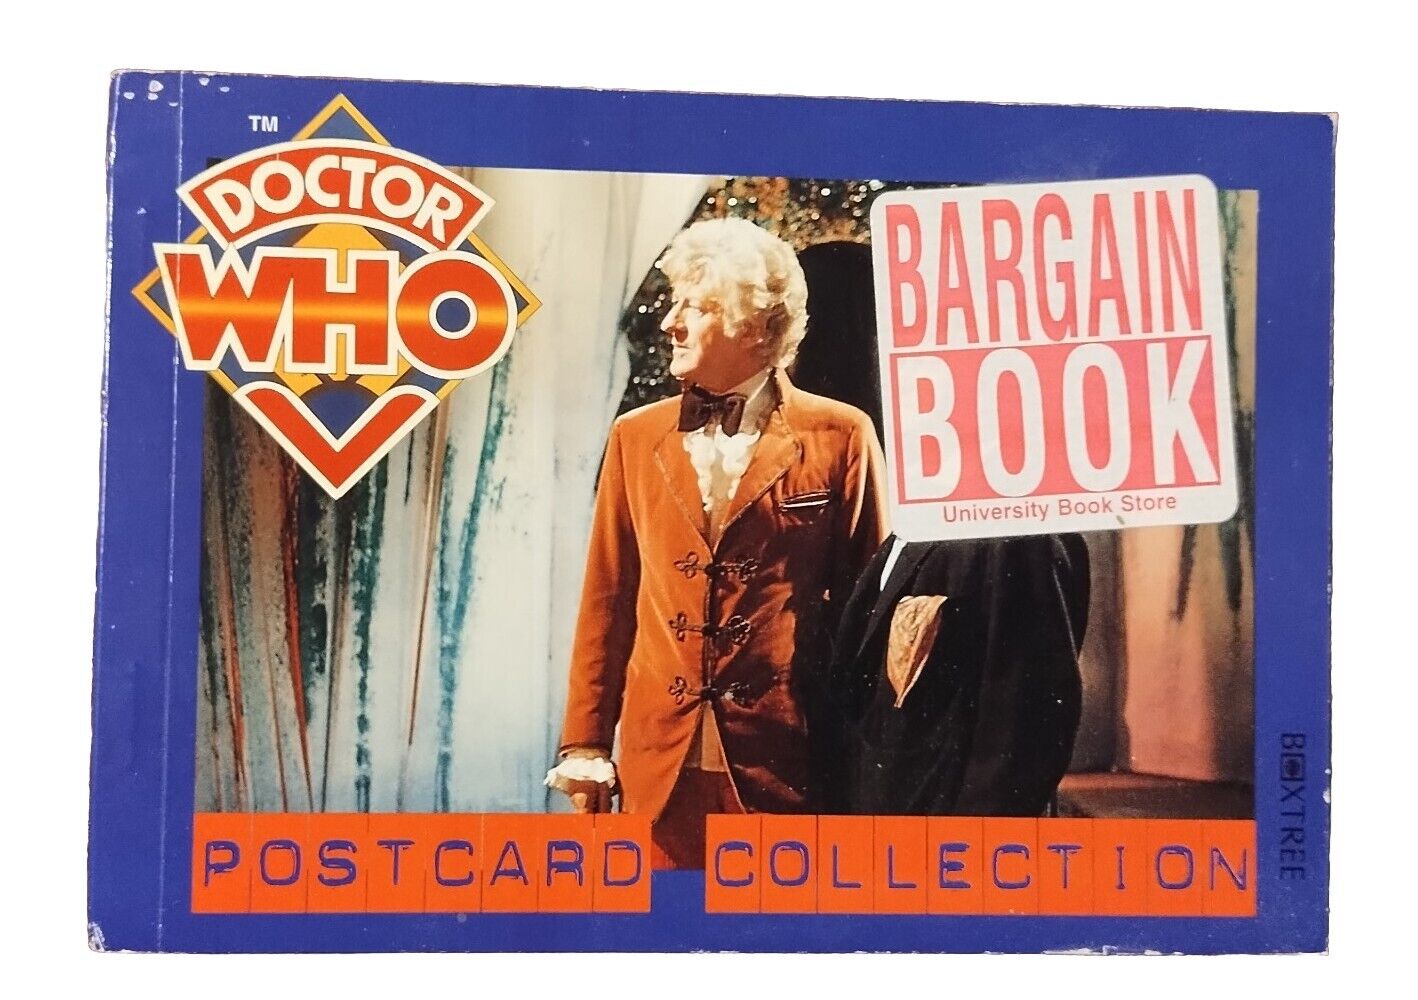 Doctor Who Postcard Collection Bargain Book - Extremely Cool Postcards.